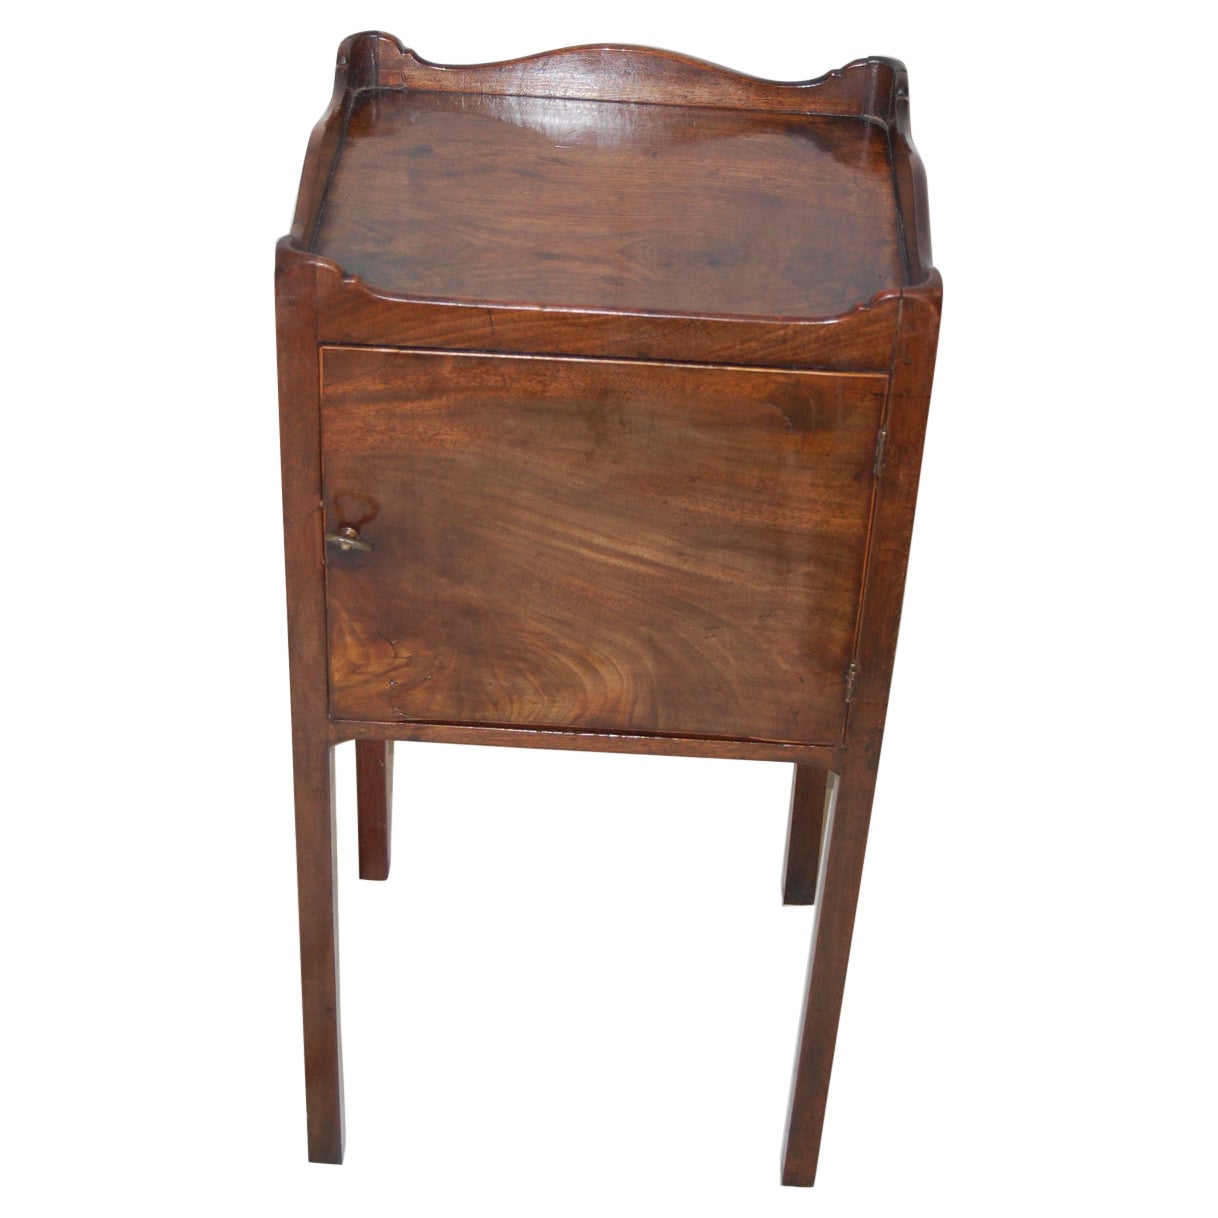 English Georgian Mahogany Tapered Leg Pot Cupboard with Galleried Top